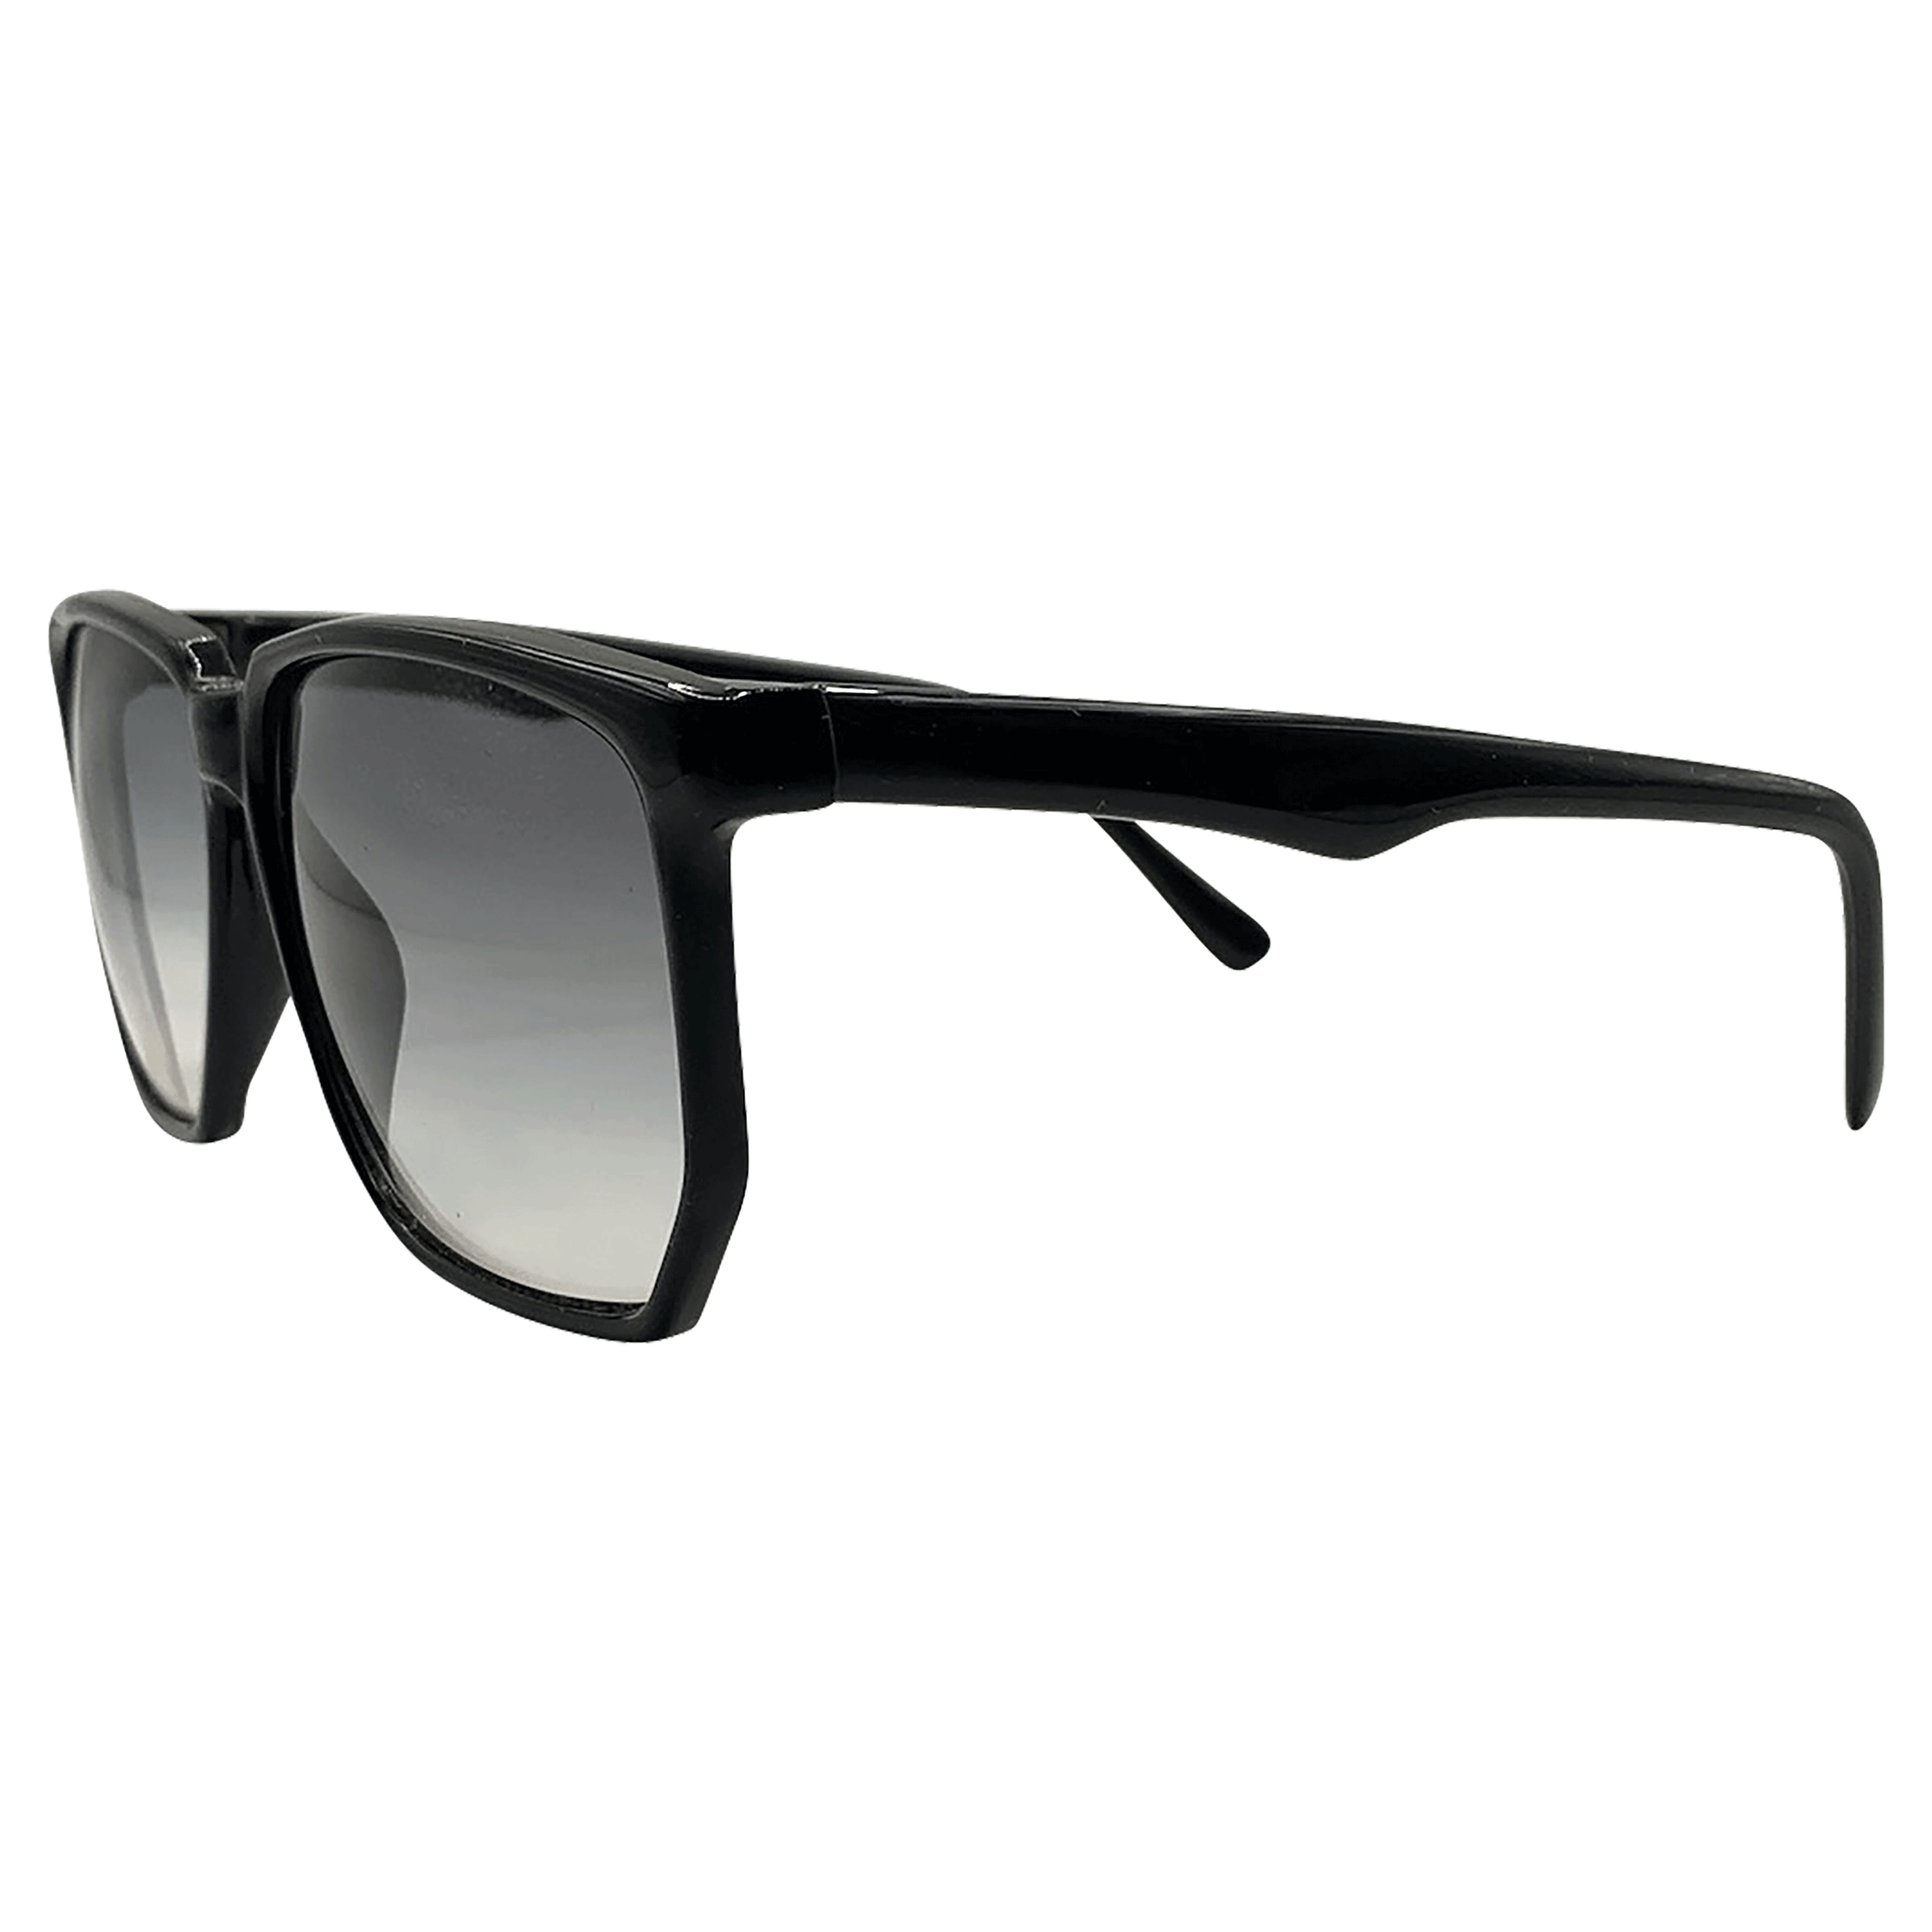 WILLOWY Large Square Classic Vintage Sunglasses